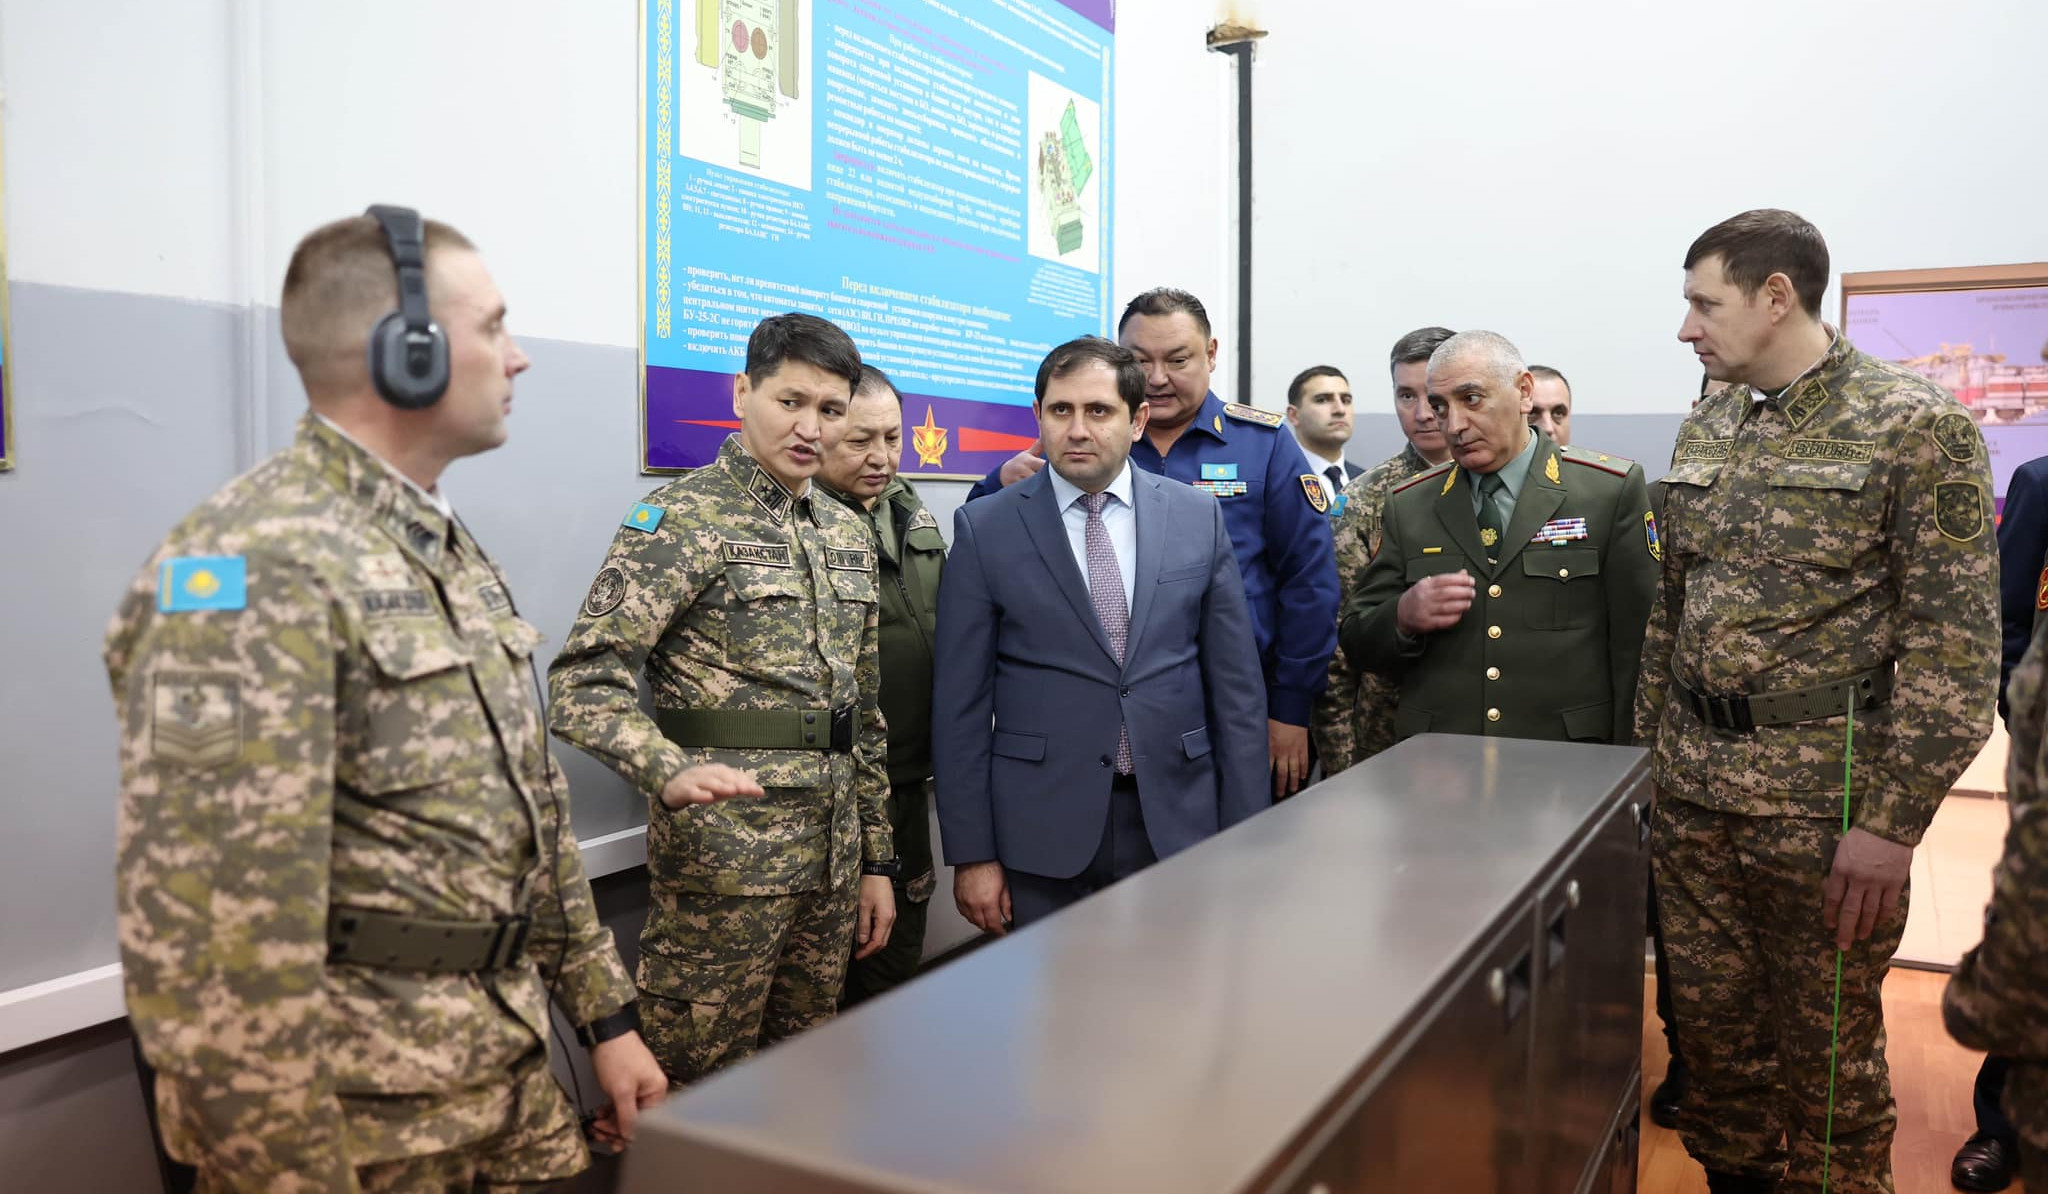 Agreement was reached to develop cooperation between Kazakhstan Military College and Sergeant Training Center of Armenia's Defense Ministry